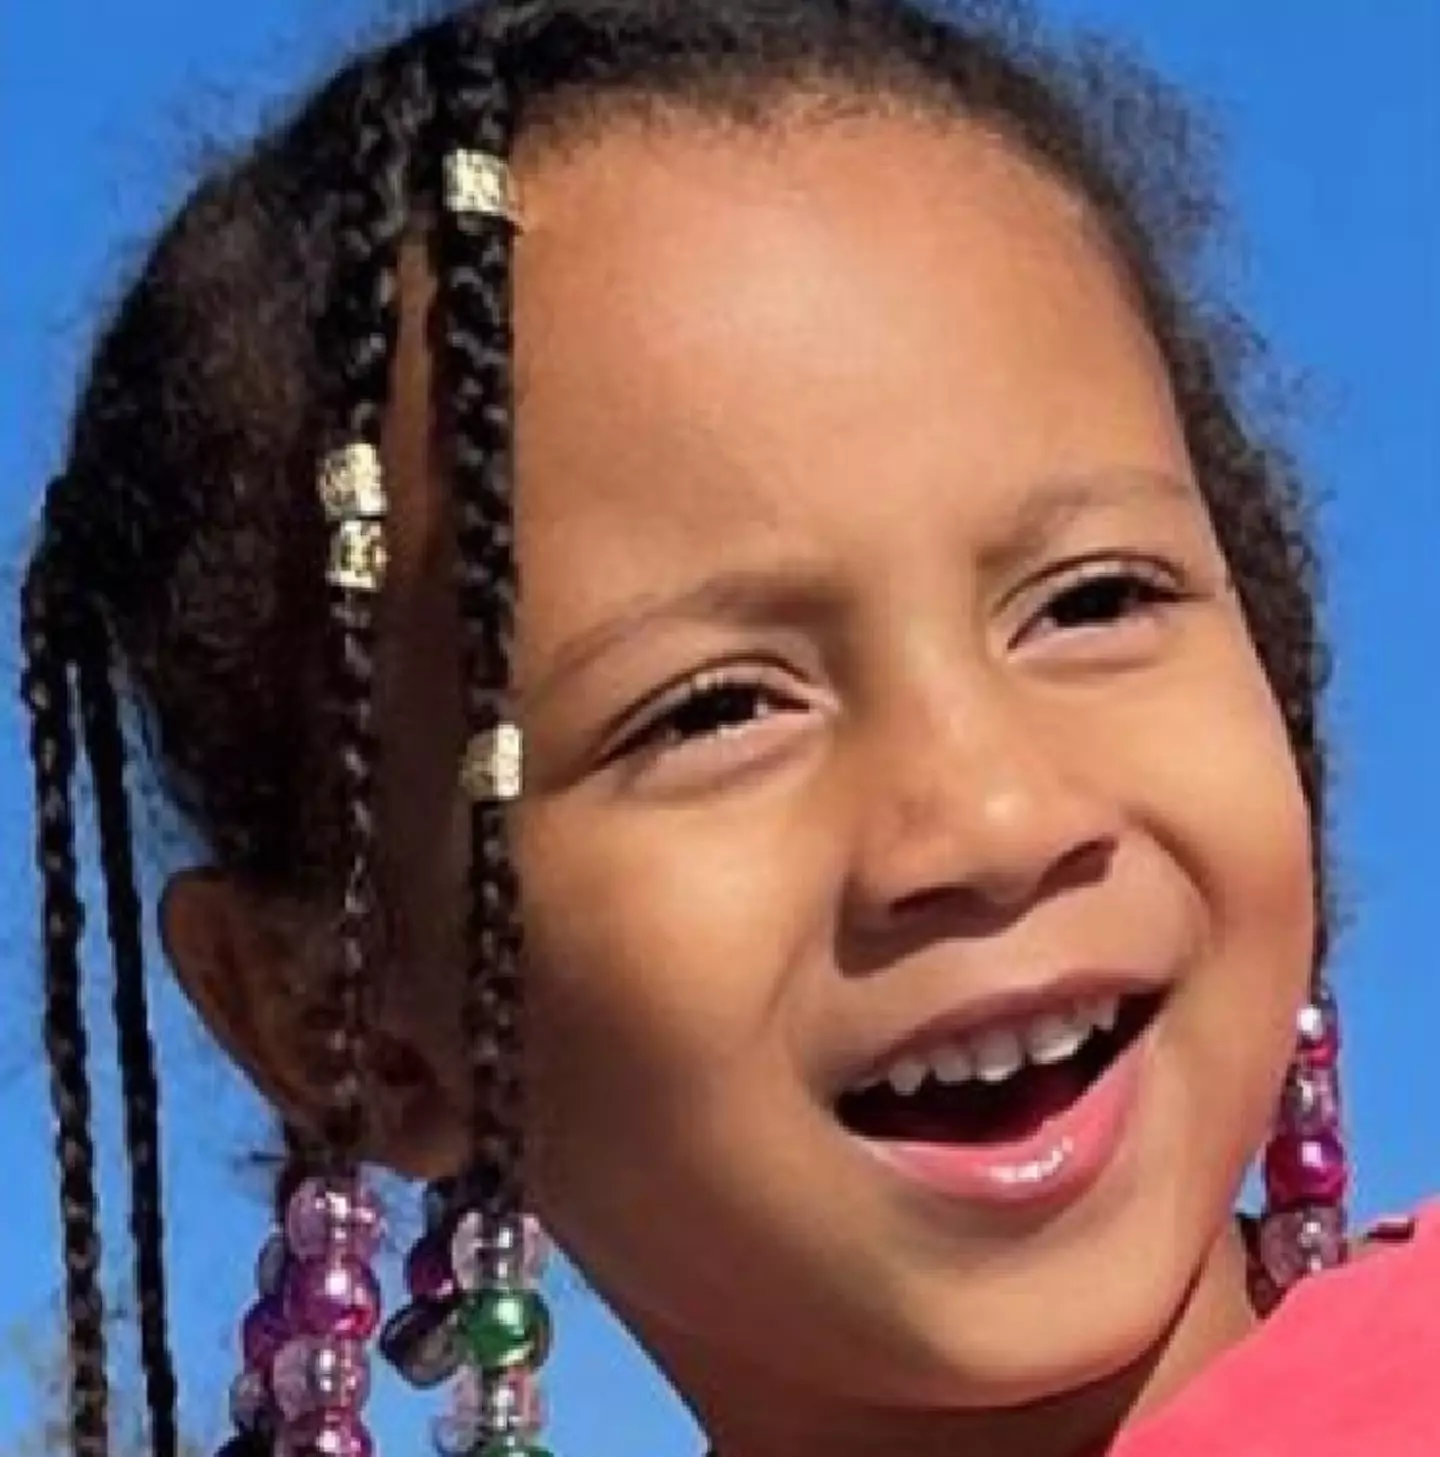 Majesty Williams was found safe in Mexico two years after she went missing from her father's home in Georgia.